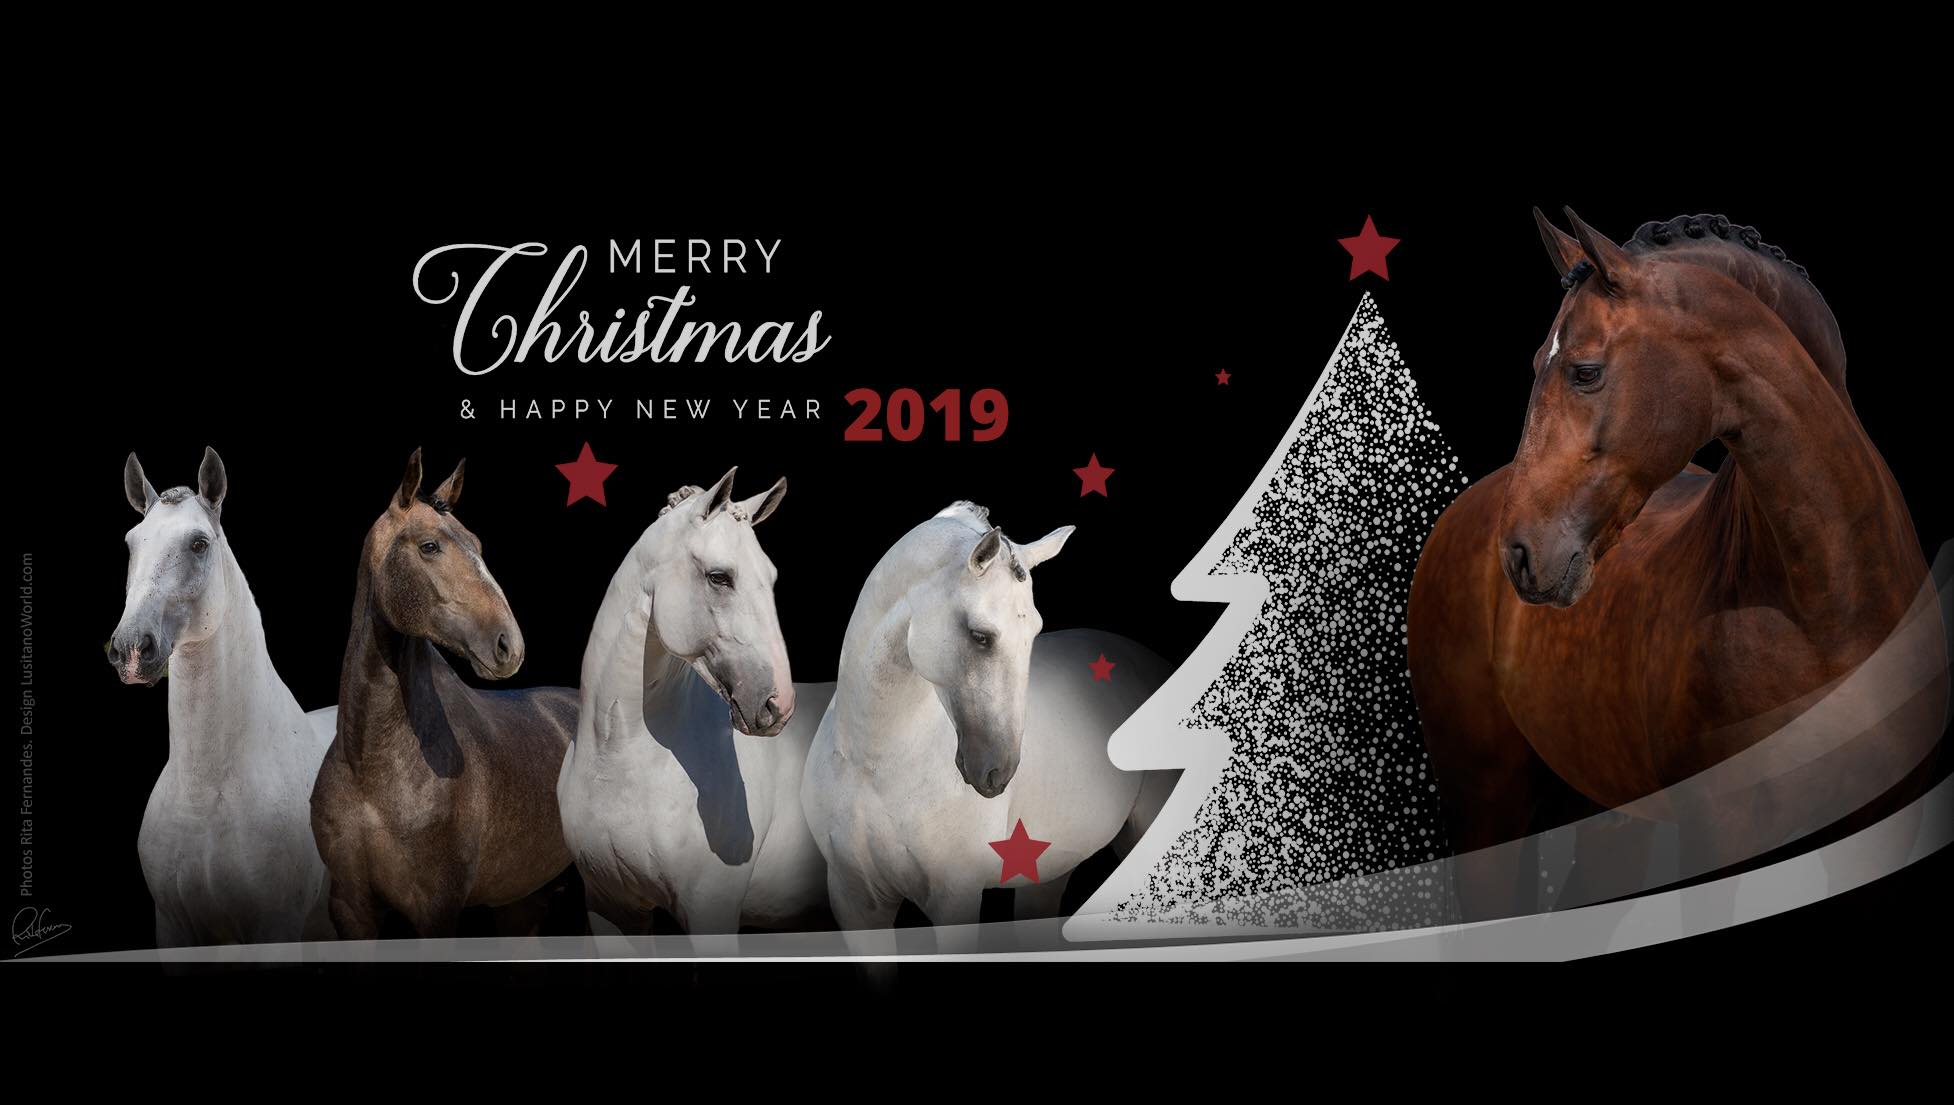 Merry Christmas and a Happy 2019